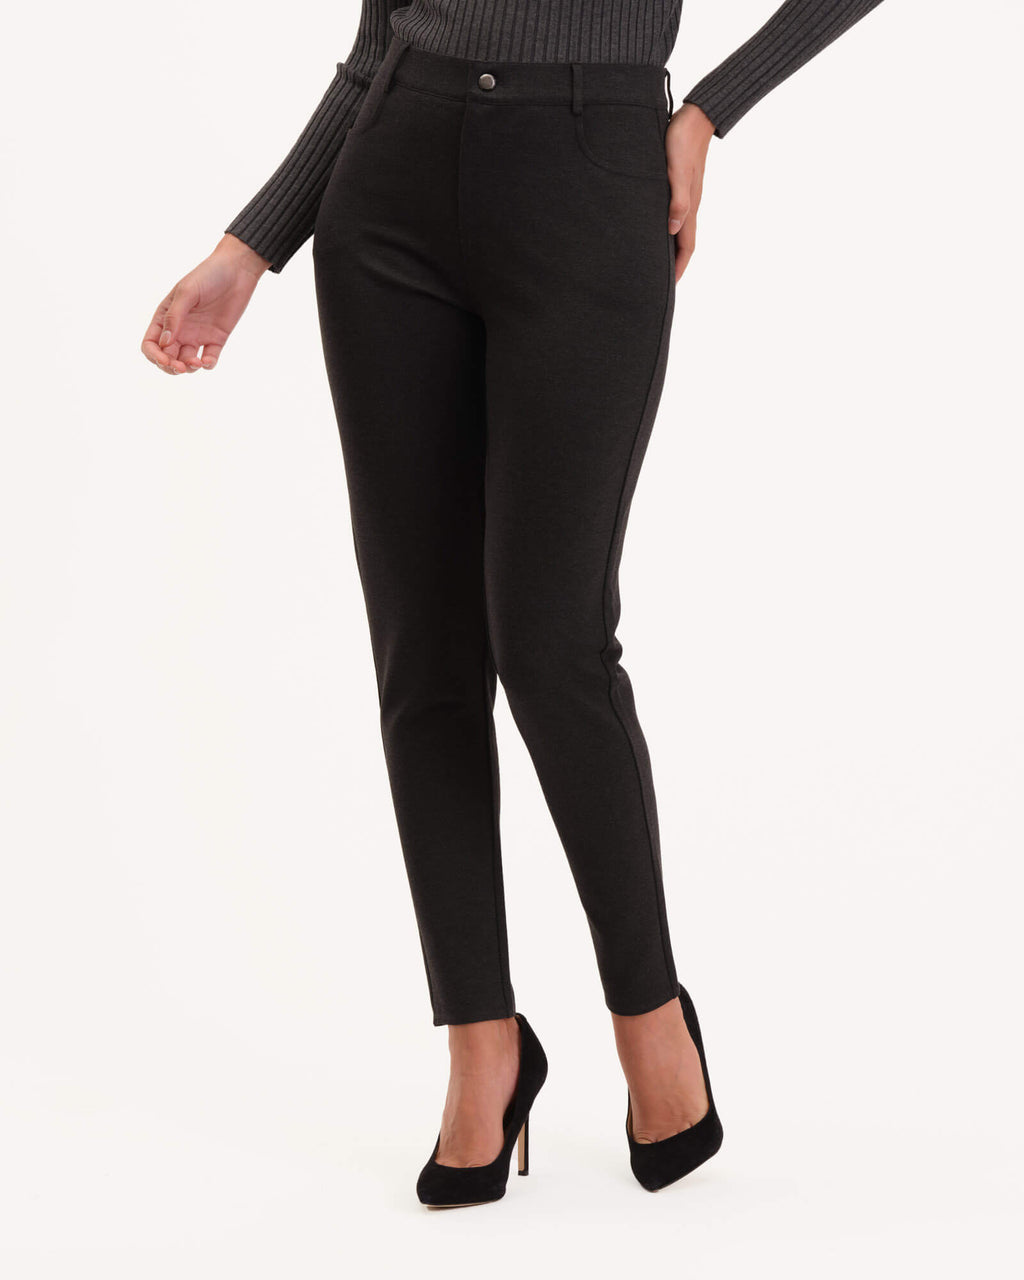 Ponte Knit Fly Front Pant